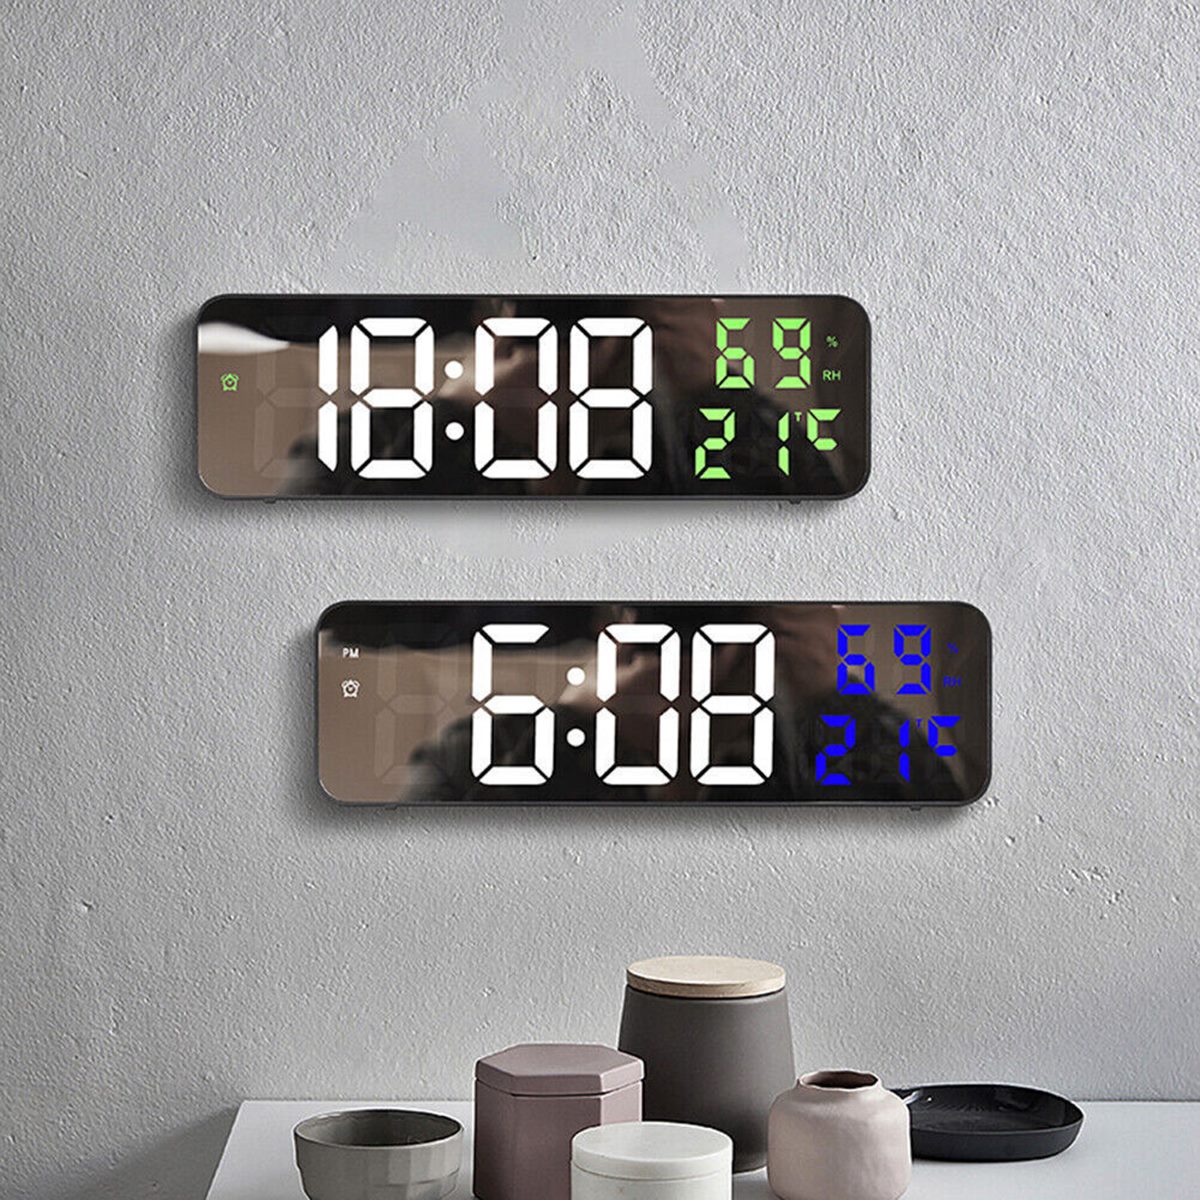 11 Amazing Wall Clock With Temperature for 2023